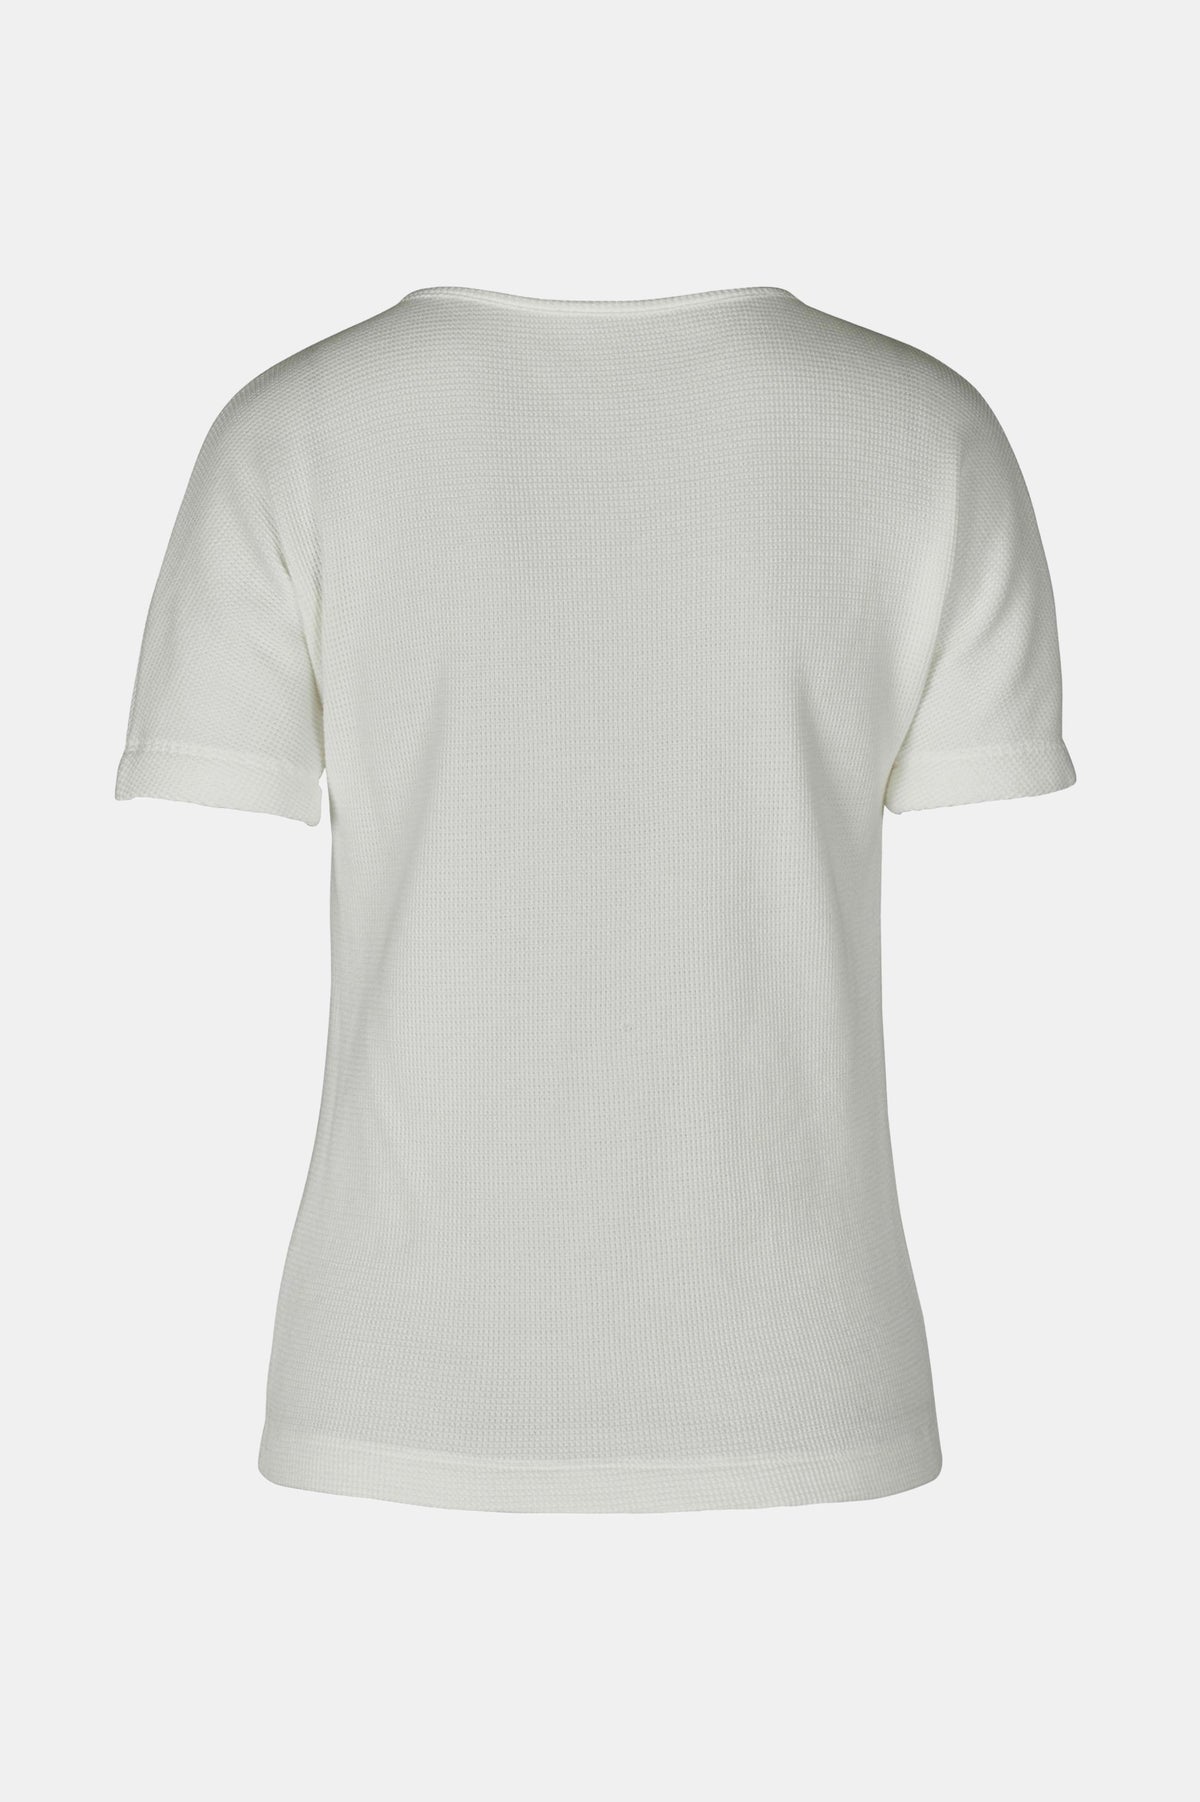 Back Scoop Neck T-Shirt in White